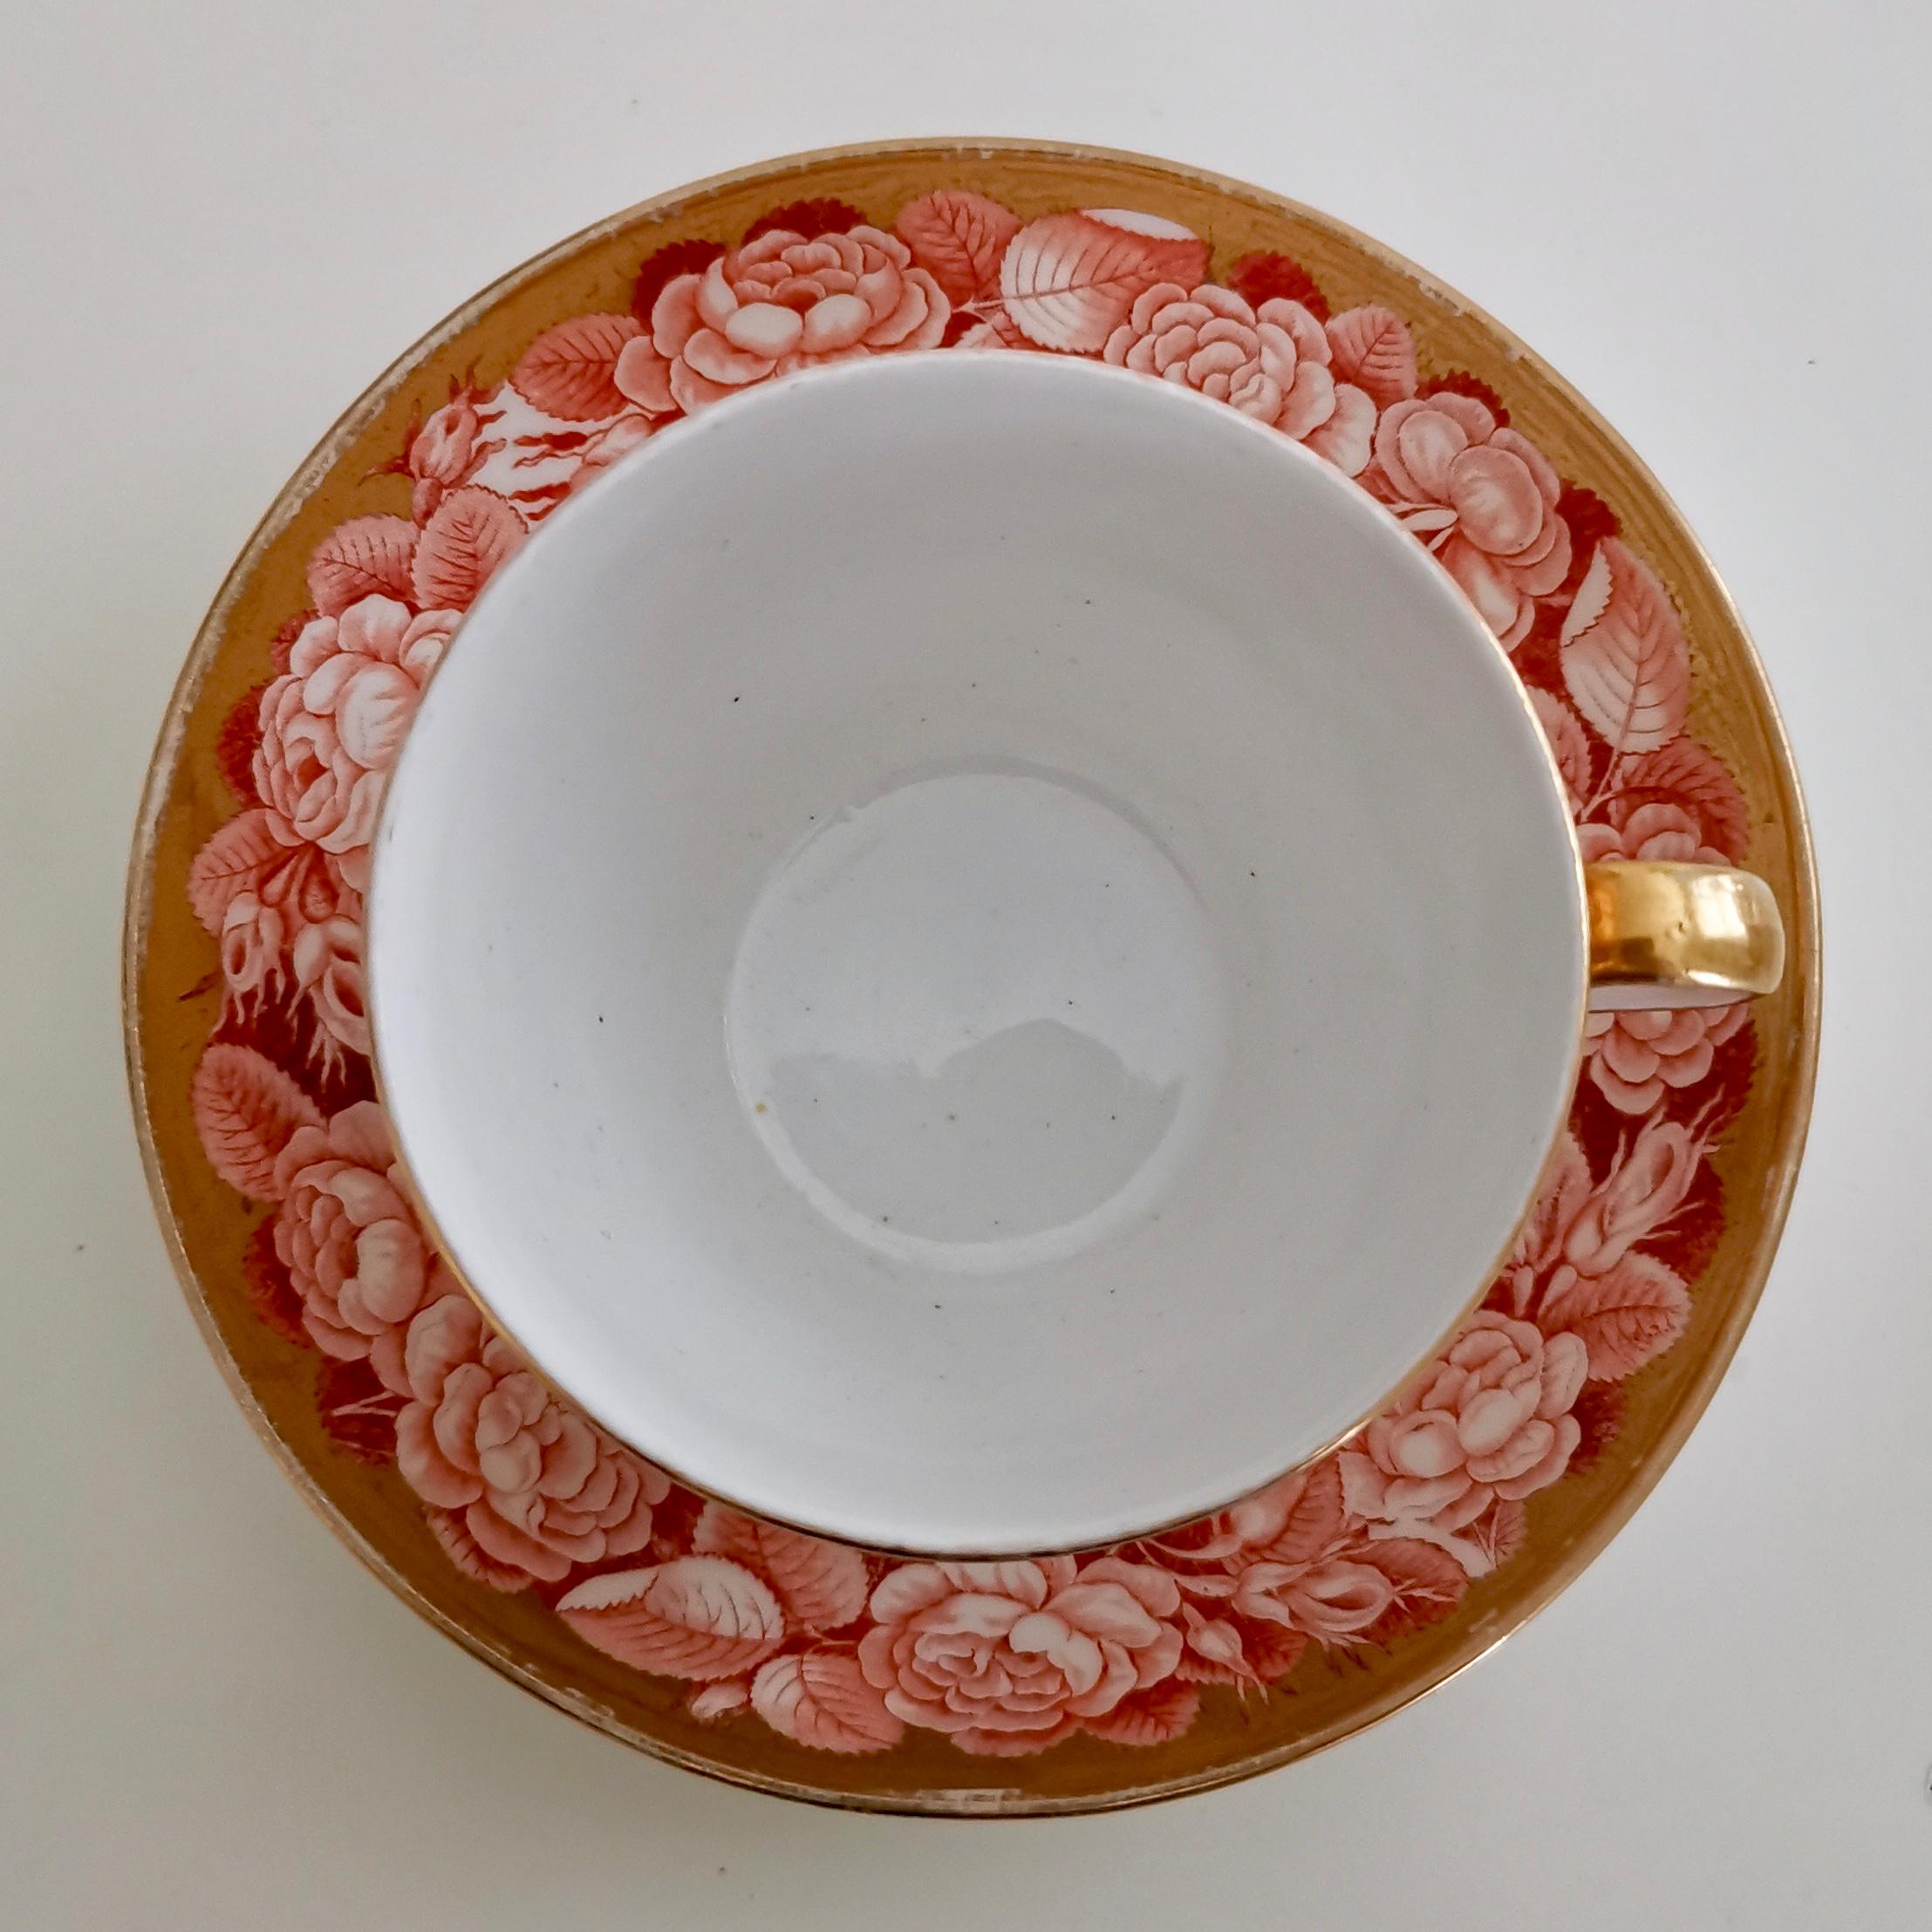 Early 19th Century Spode Teacup Trio, Red Pluck and Dust Rose Border, Georgian, circa 1806